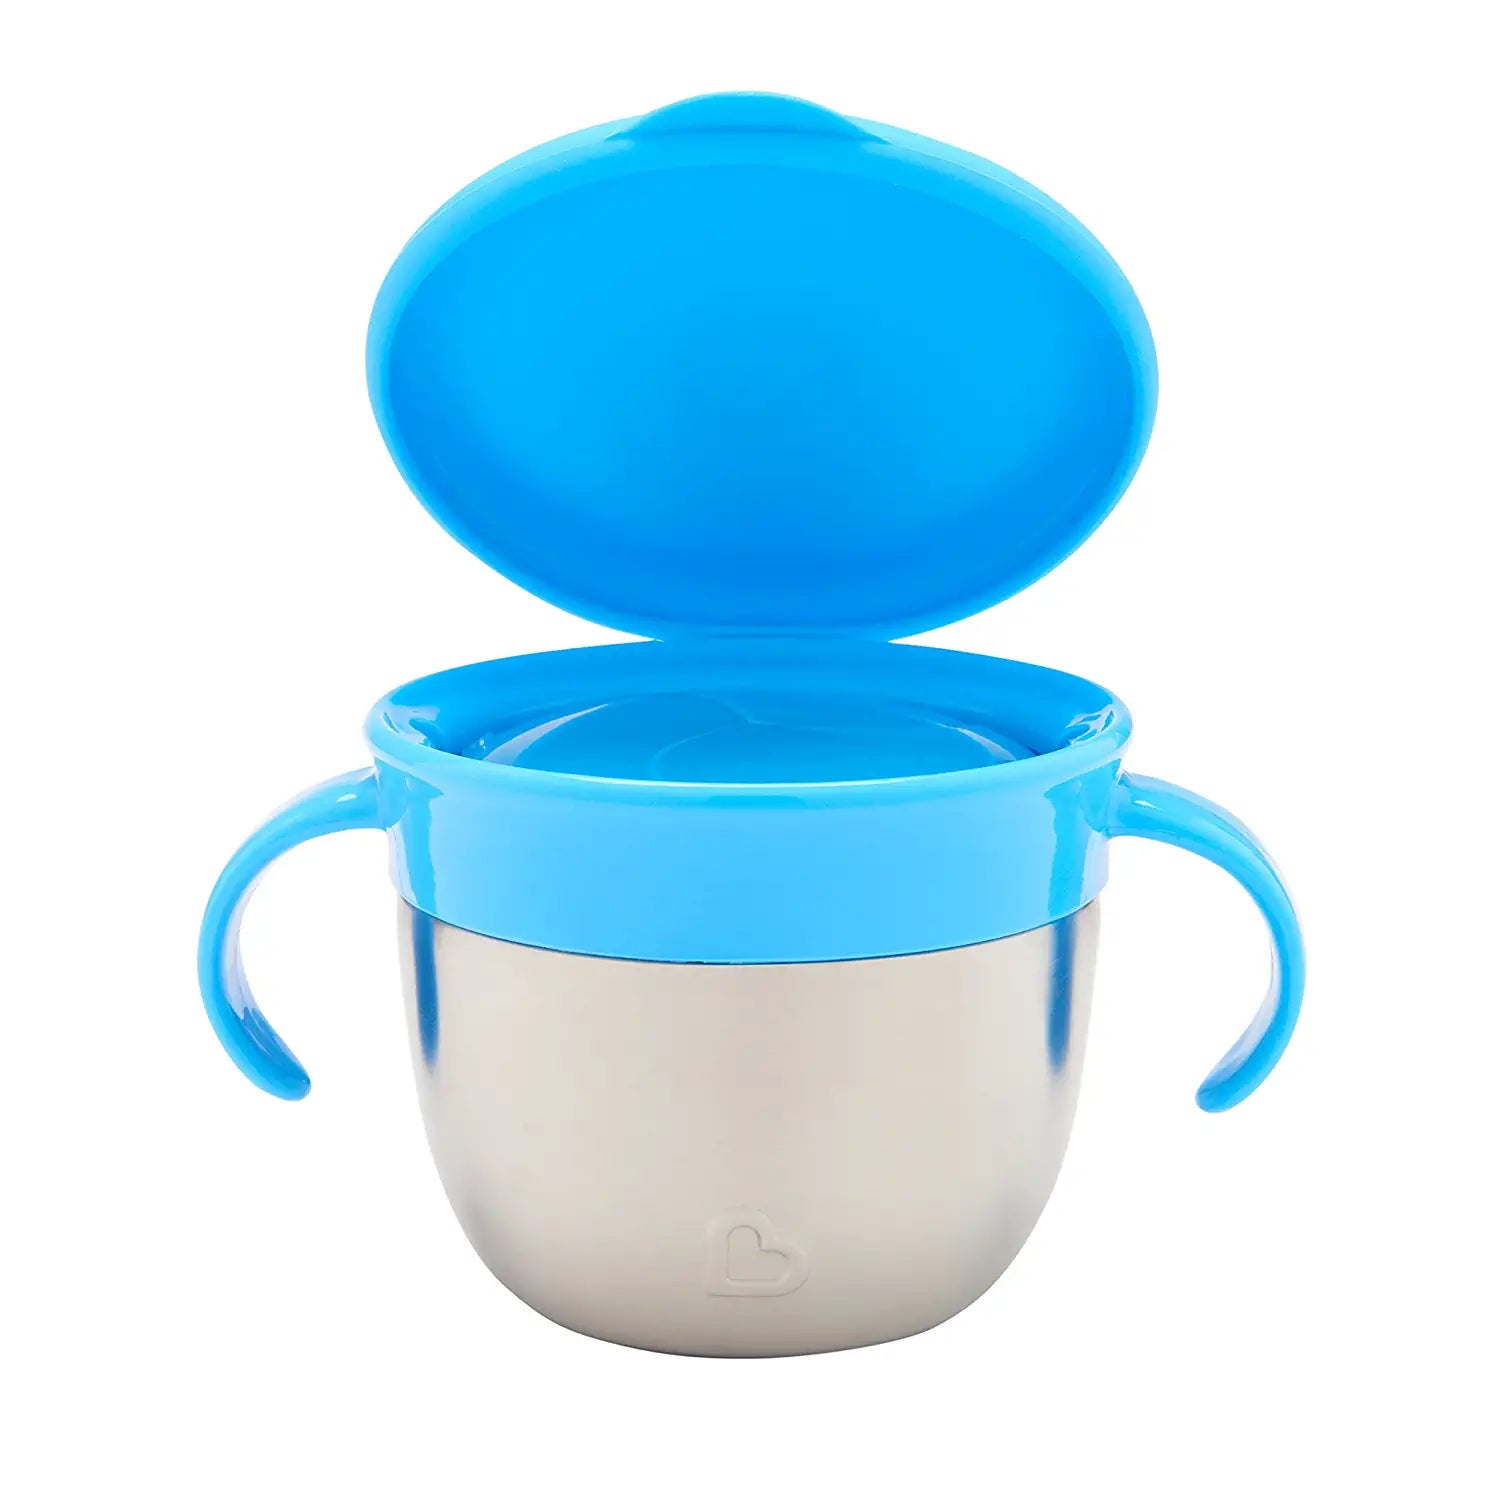 https://cdn.shopify.com/s/files/1/0452/6047/2485/products/MunchkinStainlessSteelSnackCatcherwithLid_9Ounce_Blue3.jpg?v=1668069602